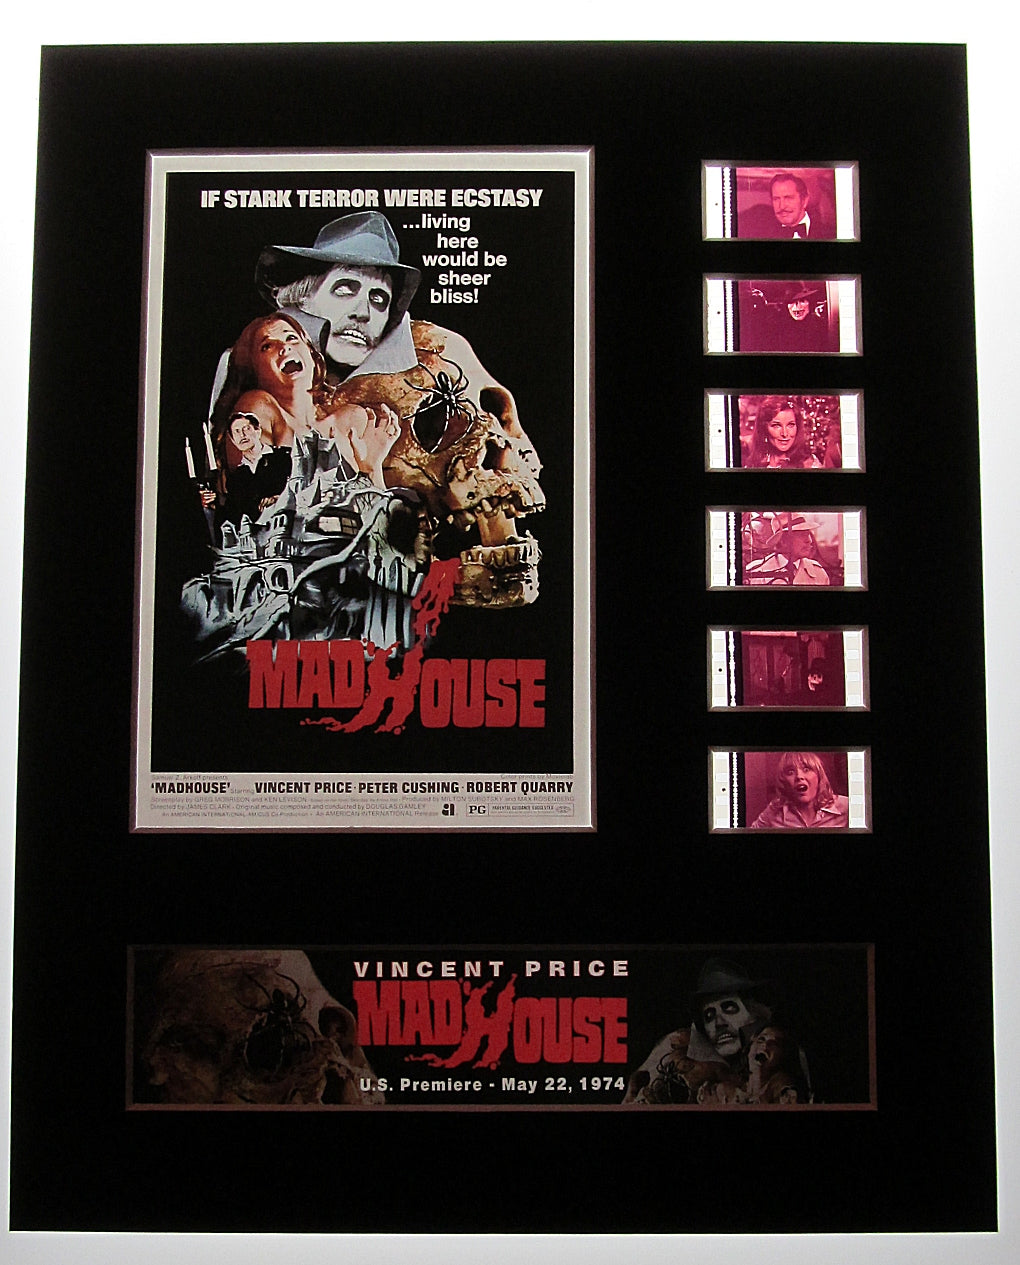 MADHOUSE Vincent Price Peter Cushing 35mm Movie Film Cell Display 8x10 Presentation Horror